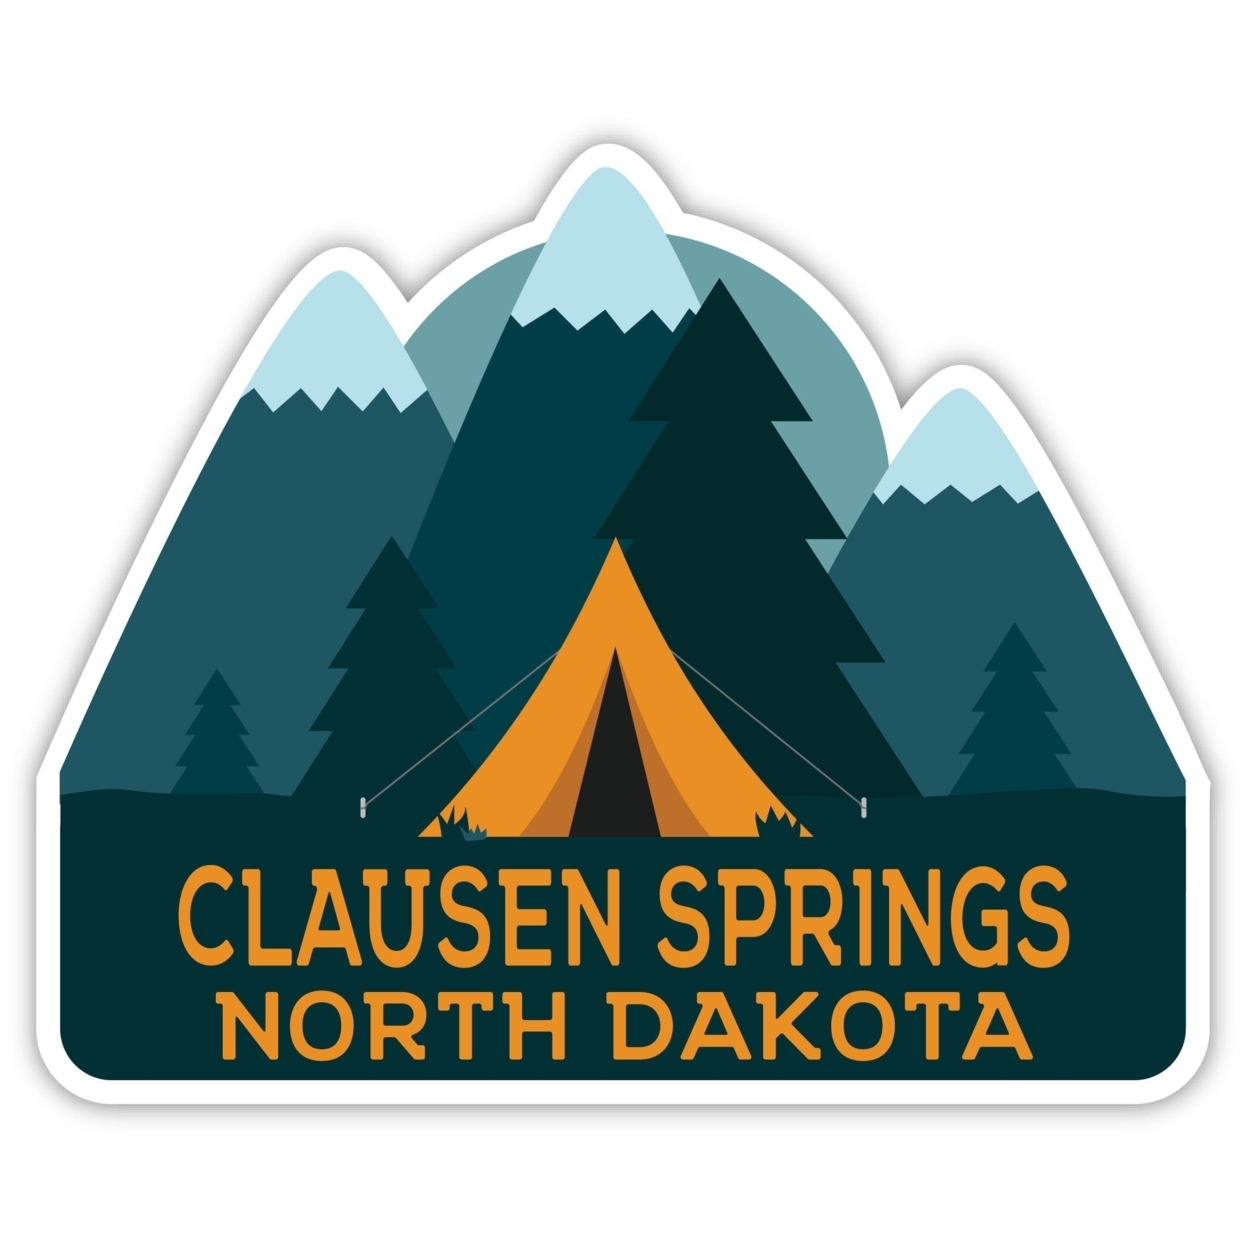 Clausen Springs North Dakota Souvenir Decorative Stickers (Choose Theme And Size) - 4-Pack, 6-Inch, Tent